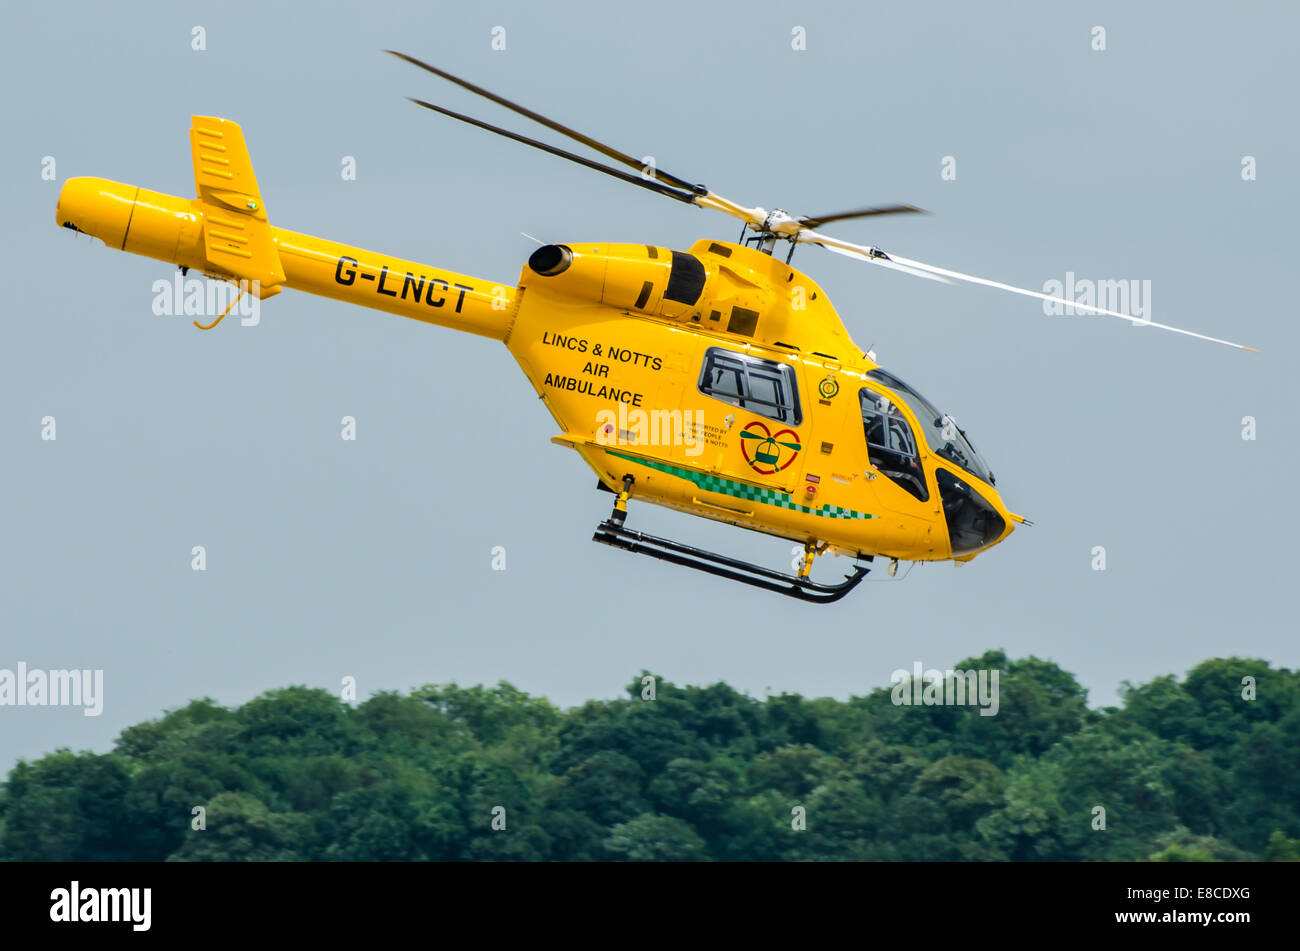 Lincolnshire & Nottinghamshire Air Ambulance is an air ambulance based at RAF Waddington, Lincs, UK which covers those counties. Flying Stock Photo